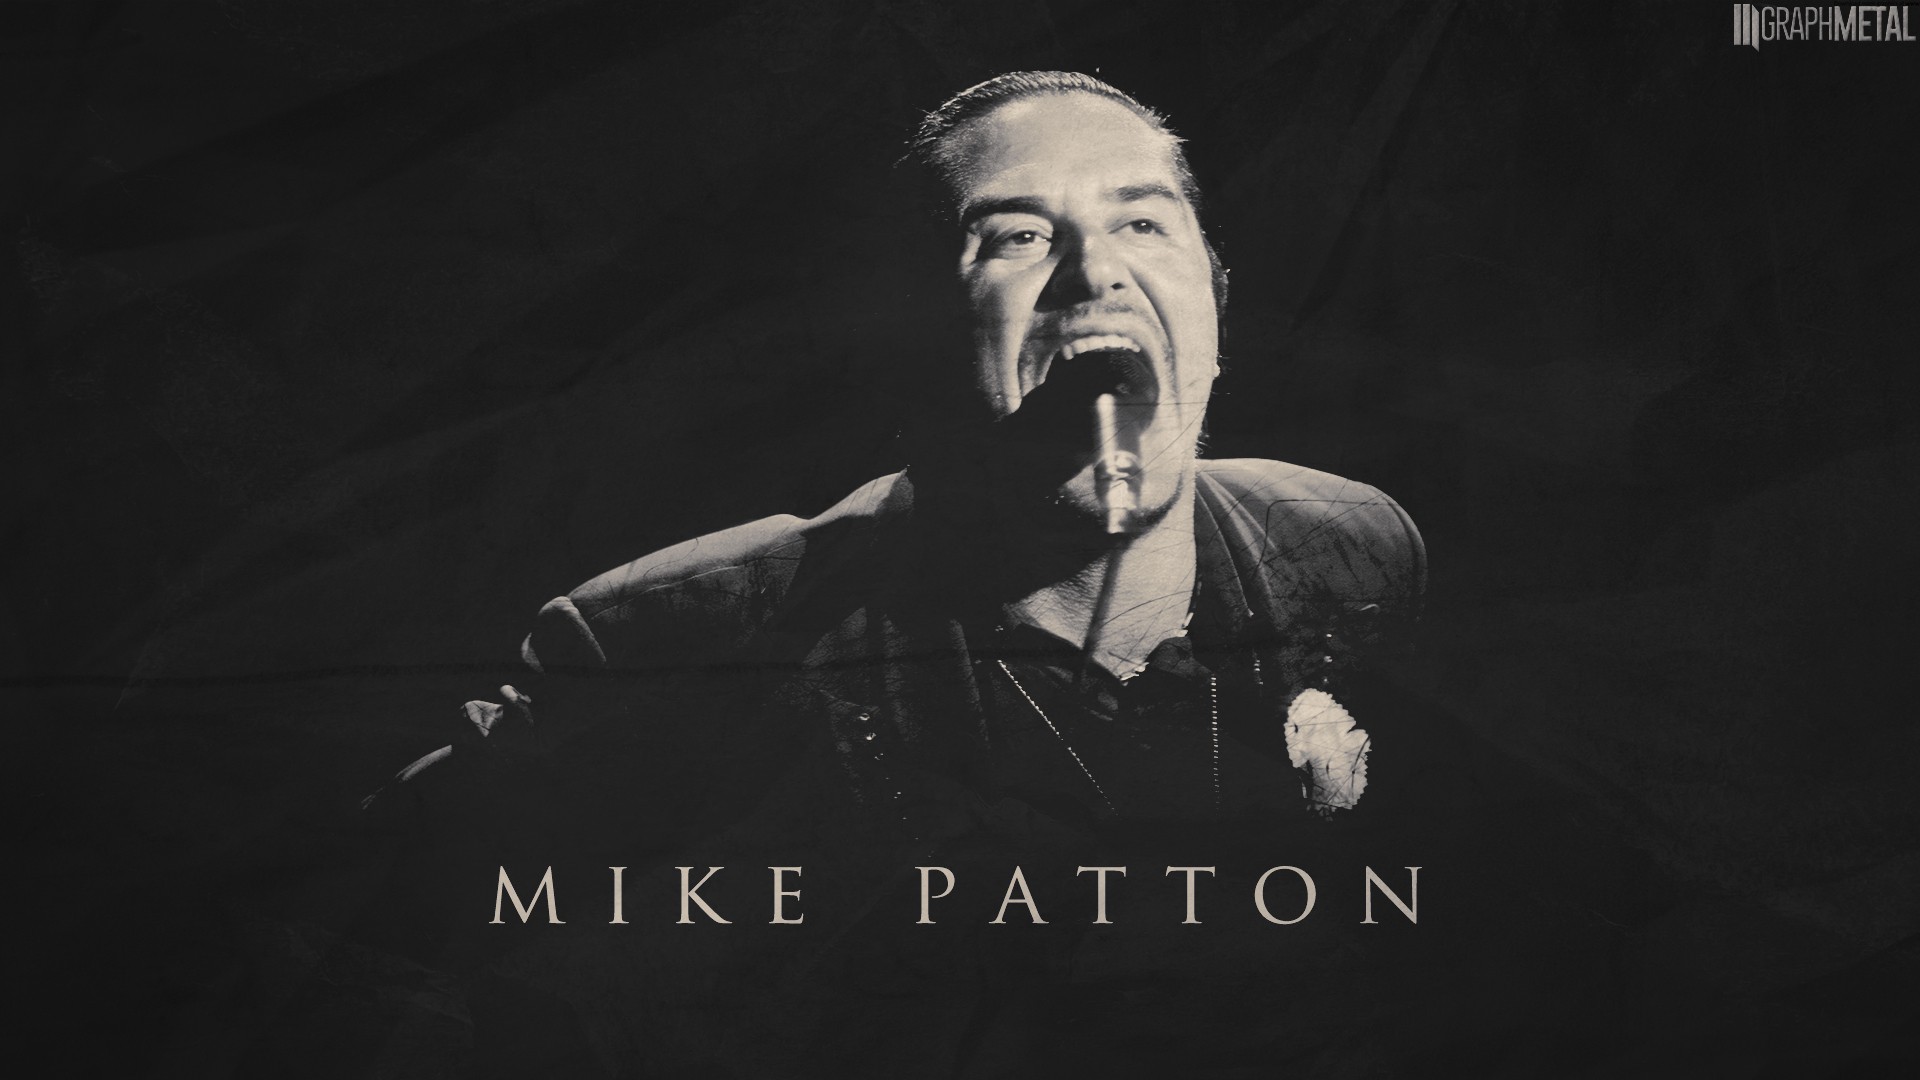 People 1920x1080 Mike Patton monochrome singer microphone open mouth men music